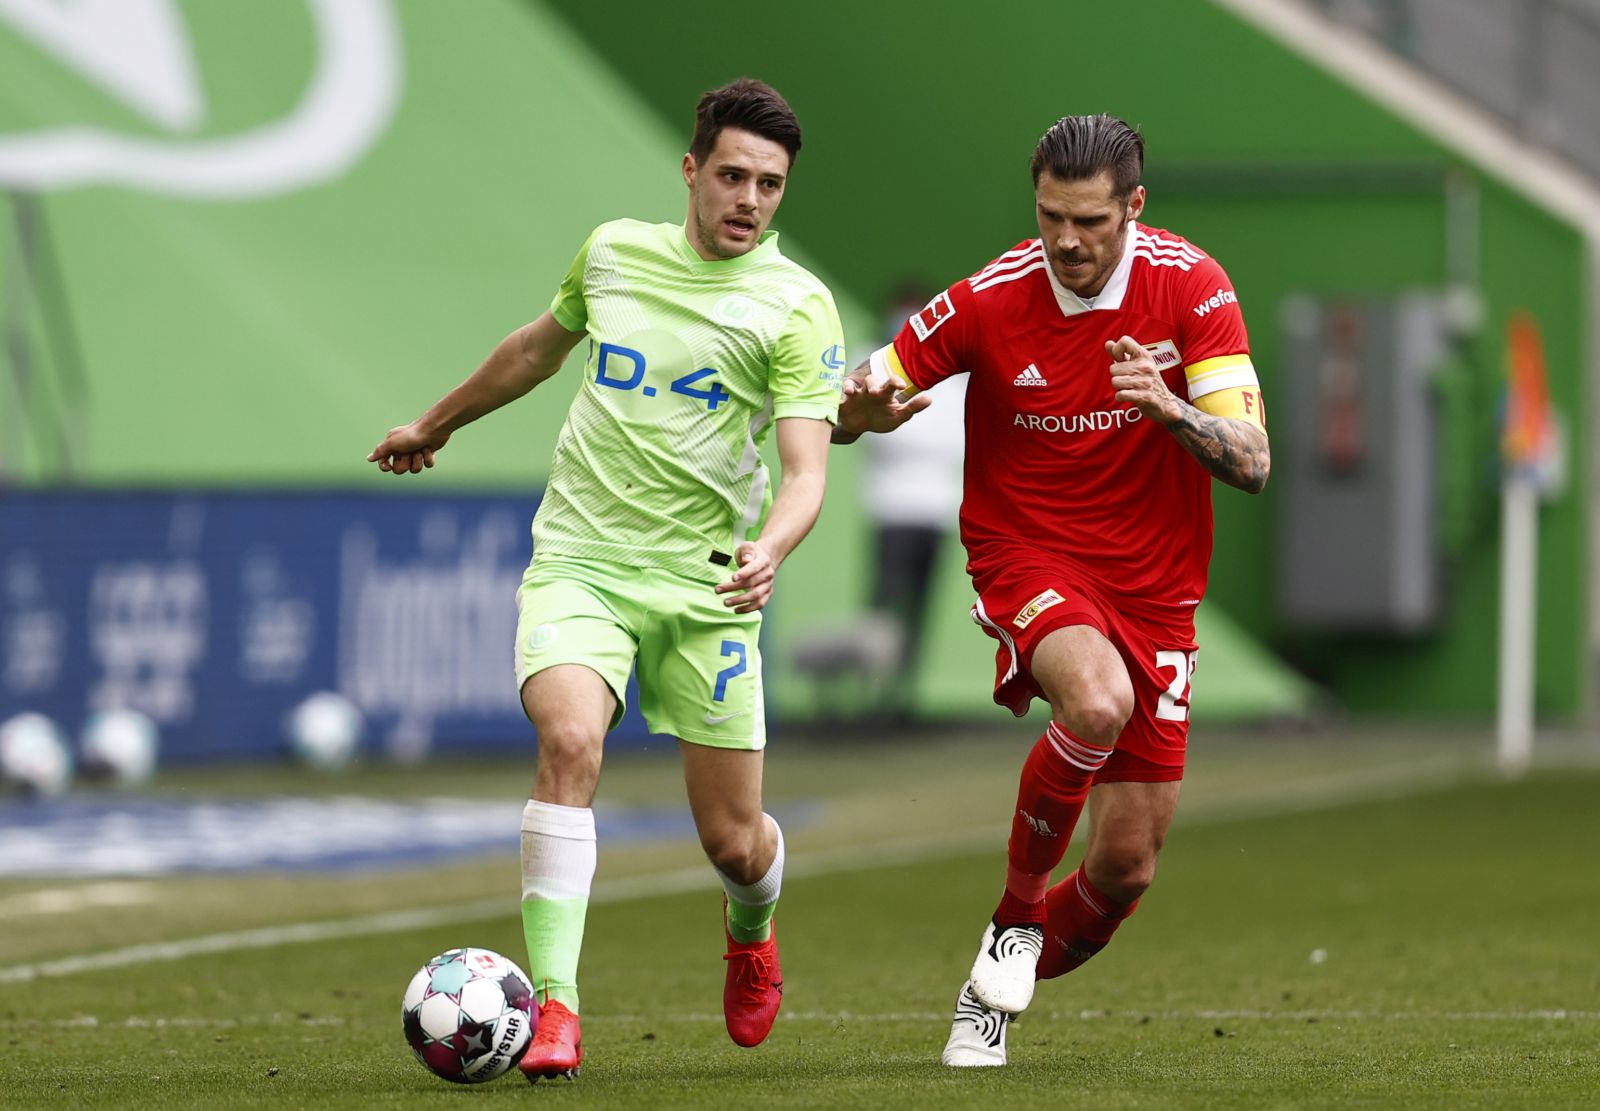 epa09185278 Josip Brekalo (L) of VfL Wolfsburg is put under pressure by Christopher Trimmel of 1.FC Union Berlin during the German Bundesliga match between VfL Wolfsburg and 1. FC Union Berlin at Volkswagen Arena in Wolfsburg, Germany, 08 May 2021.  EPA/MAJA HITIJ / POOL CONDITIONS - ATTENTION:  The DFB regulations prohibit any use of photographs as image sequences and/or quasi-video.